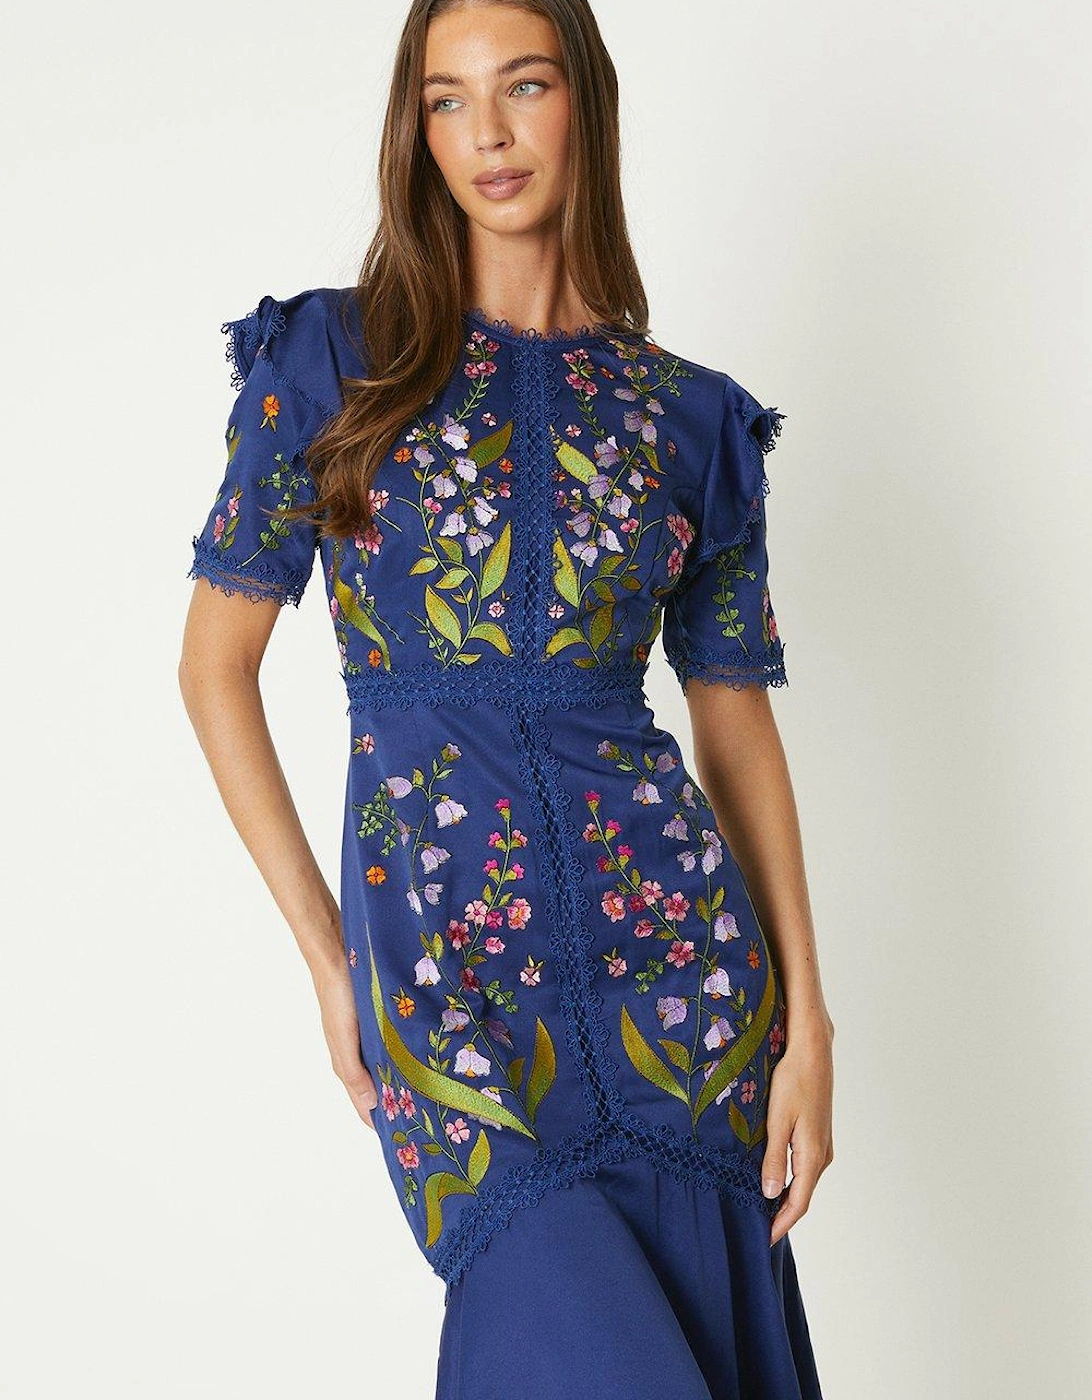 Embroidered Flute Hem Midi Dress With Lace Trim